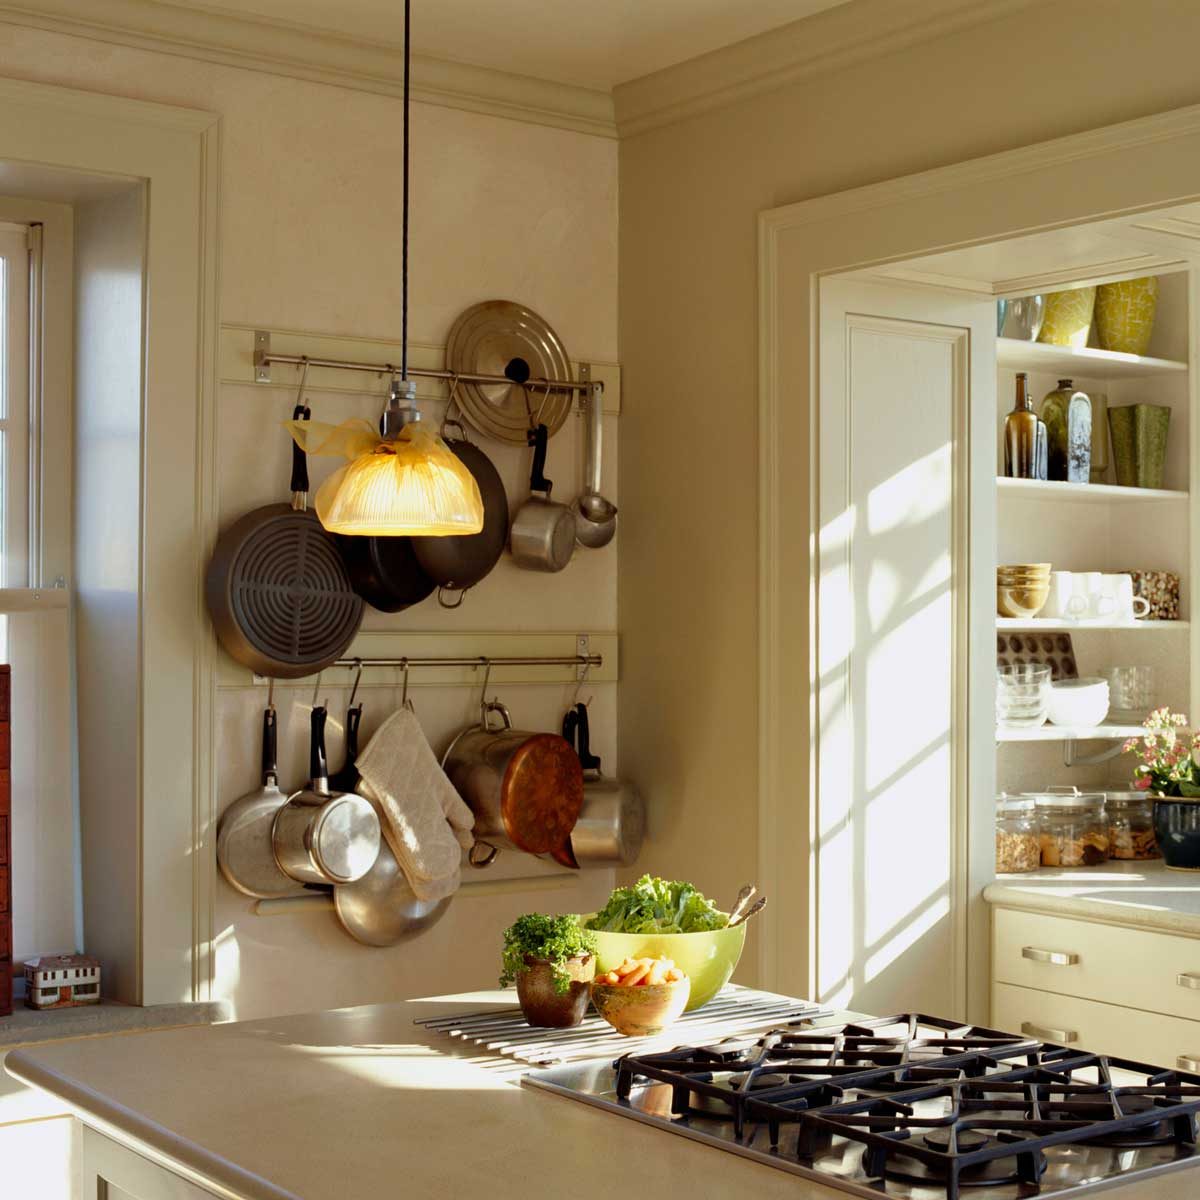 8 Best Pot Racks to Organize Your Kitchen in Style